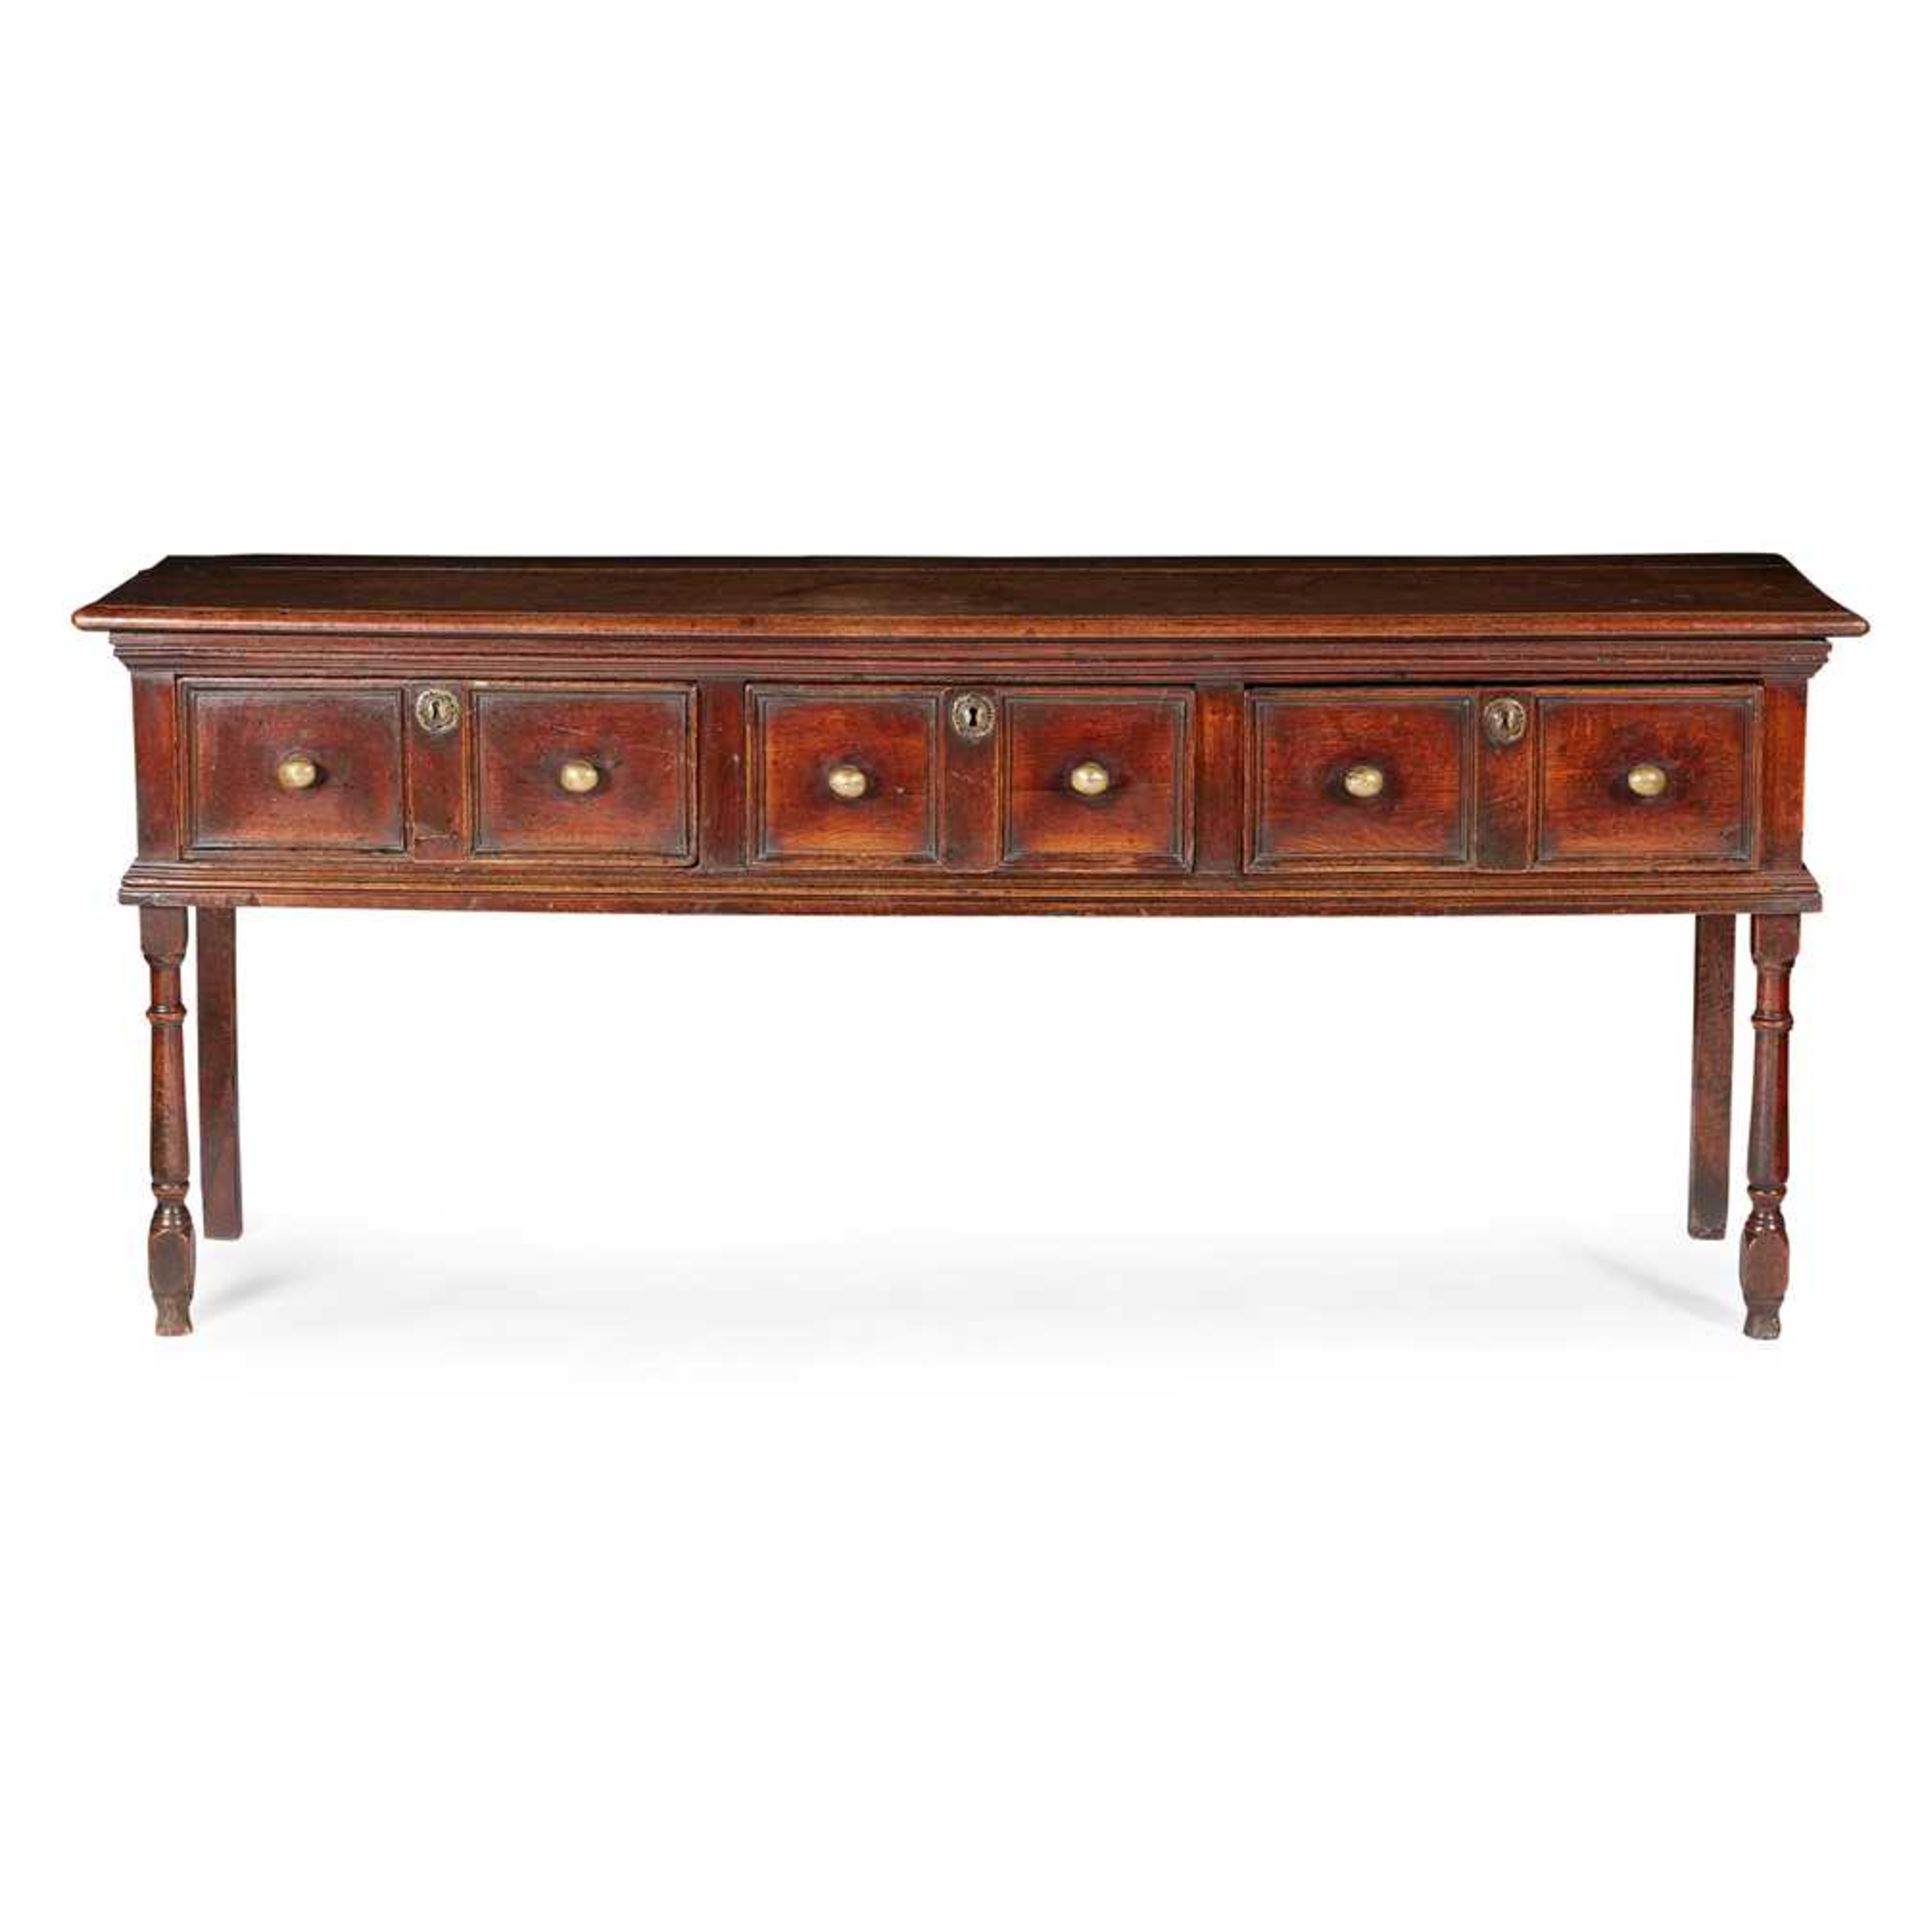 WILLIAM AND MARY OAK DRESSER BASE LATE 17TH CENTURY/ EARLY 18TH CENTURY